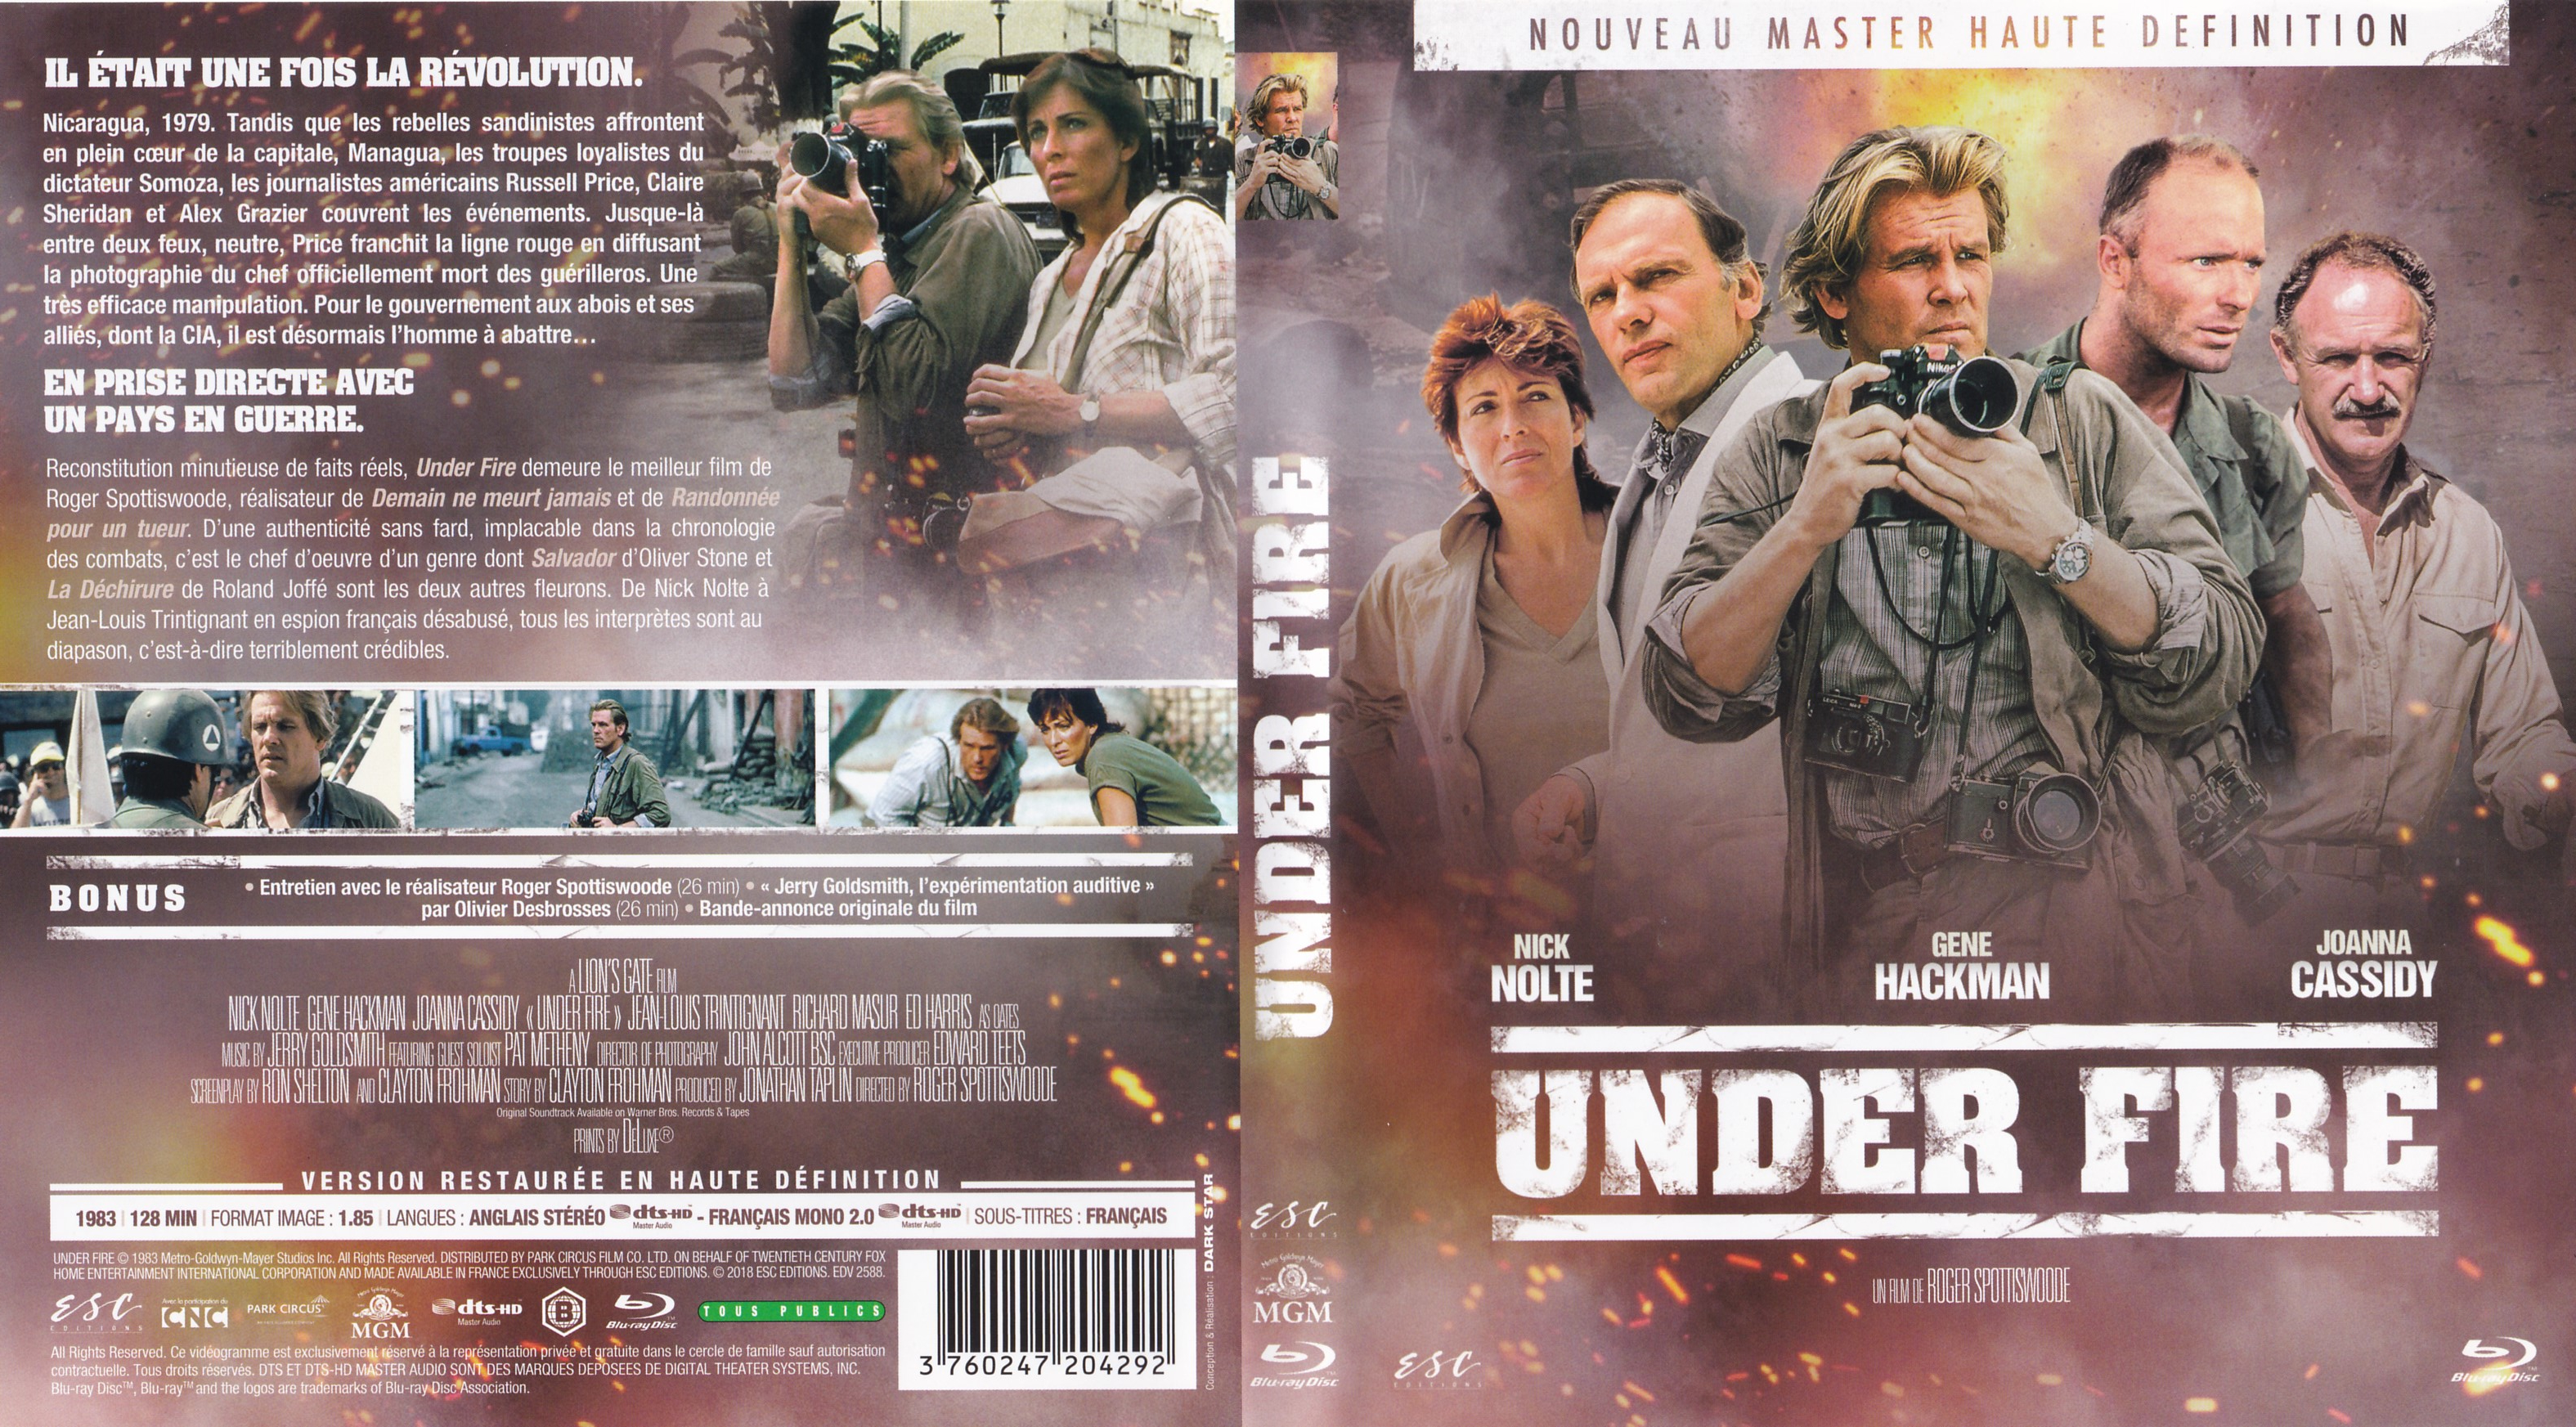 Jaquette DVD Under fire (BLU-RAY)